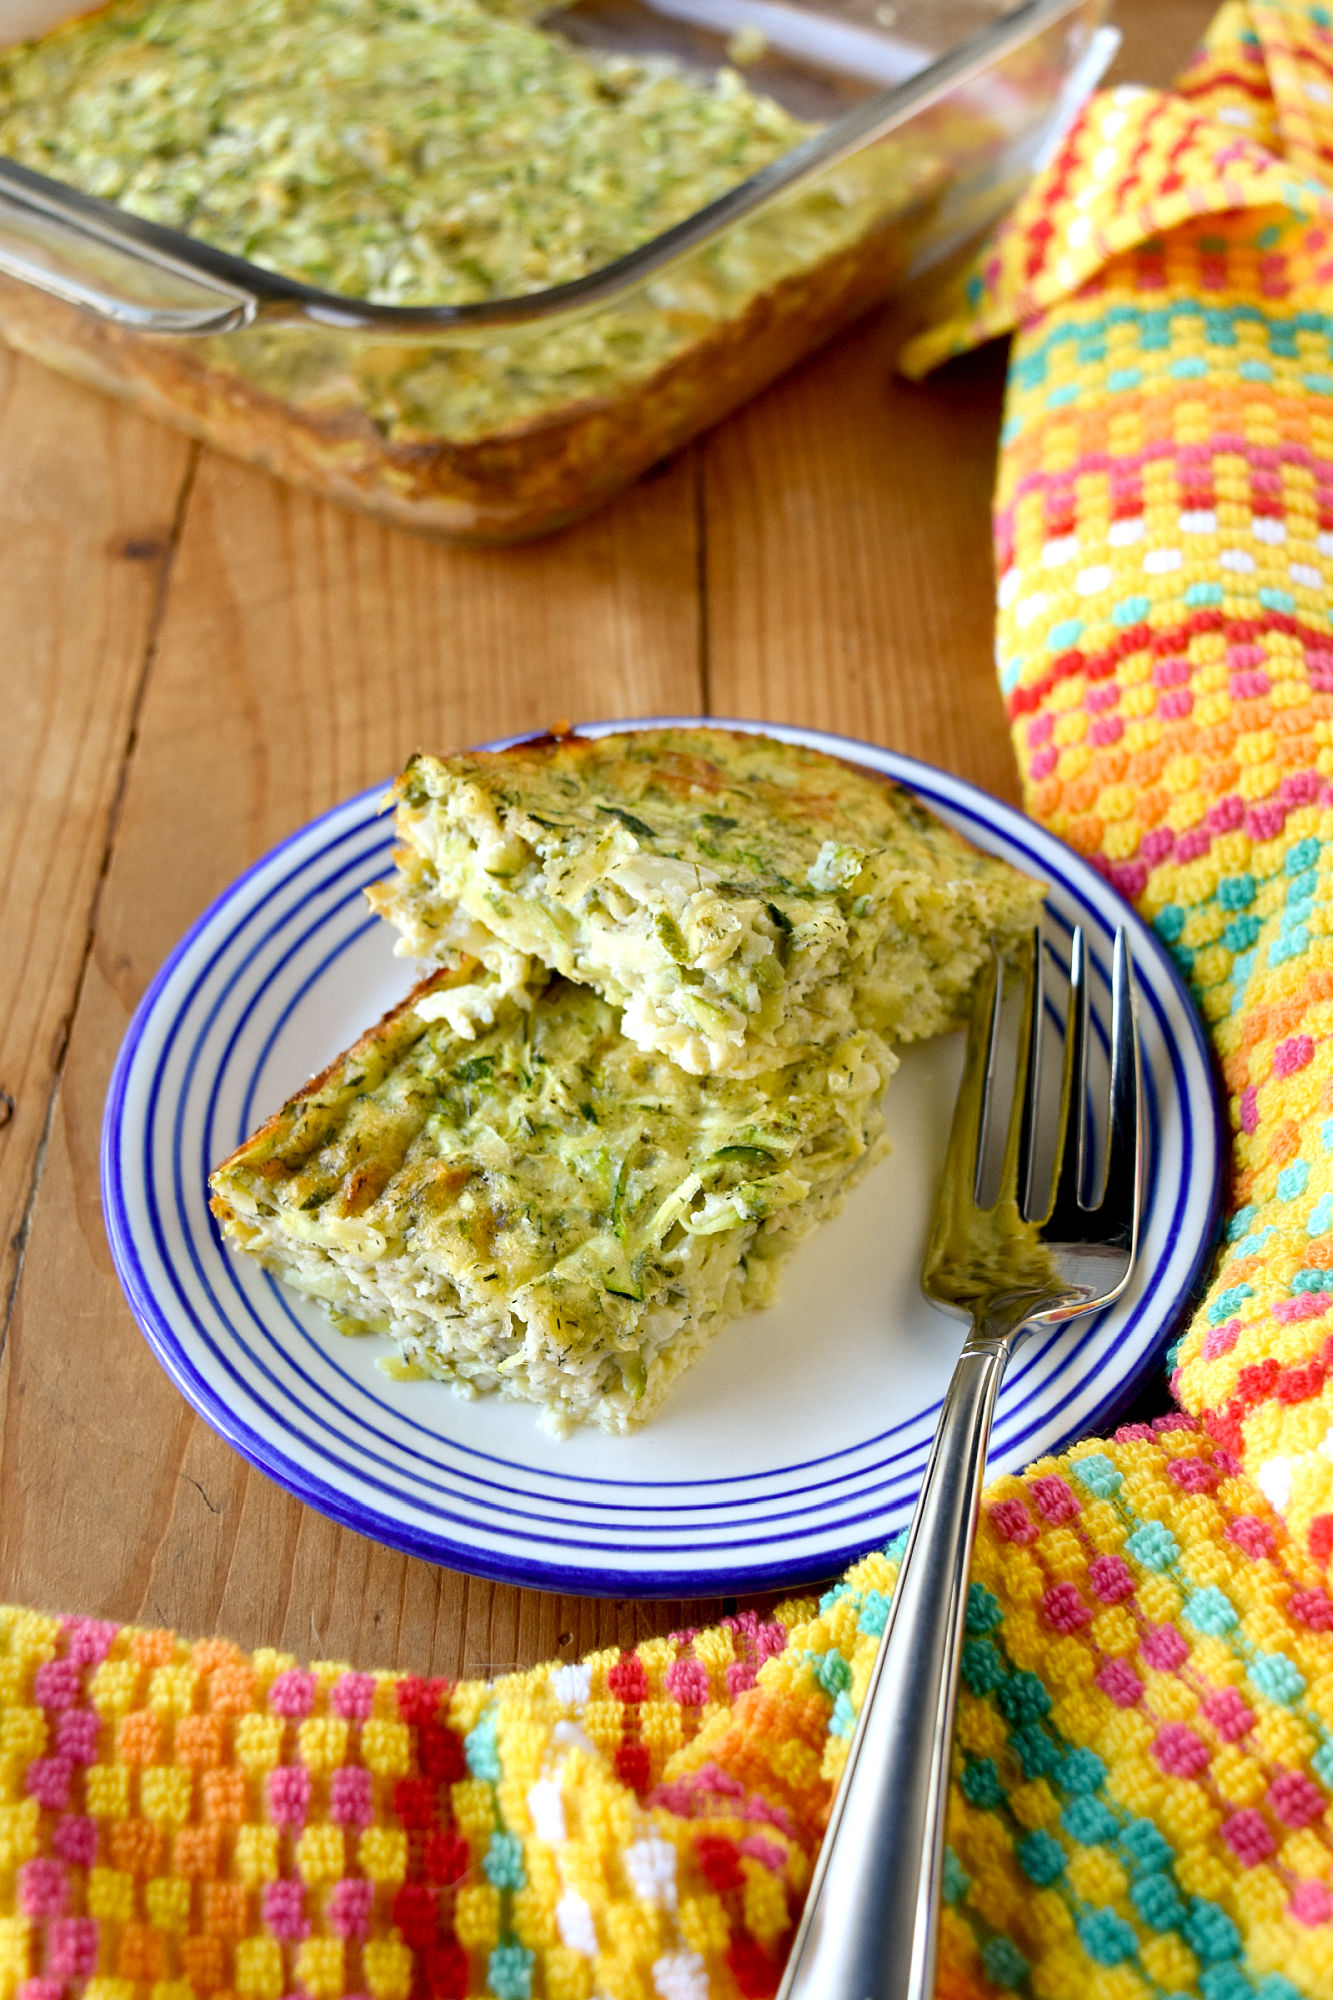 Crustless Zucchini and Cheese Pie has 2 kinds of cheese and bakes up in no time. It’s packed with fresh summer zucchini and makes a great appetizer or light lunch. #FarmersMarketWeek #zucchinirecipe #cheesepie